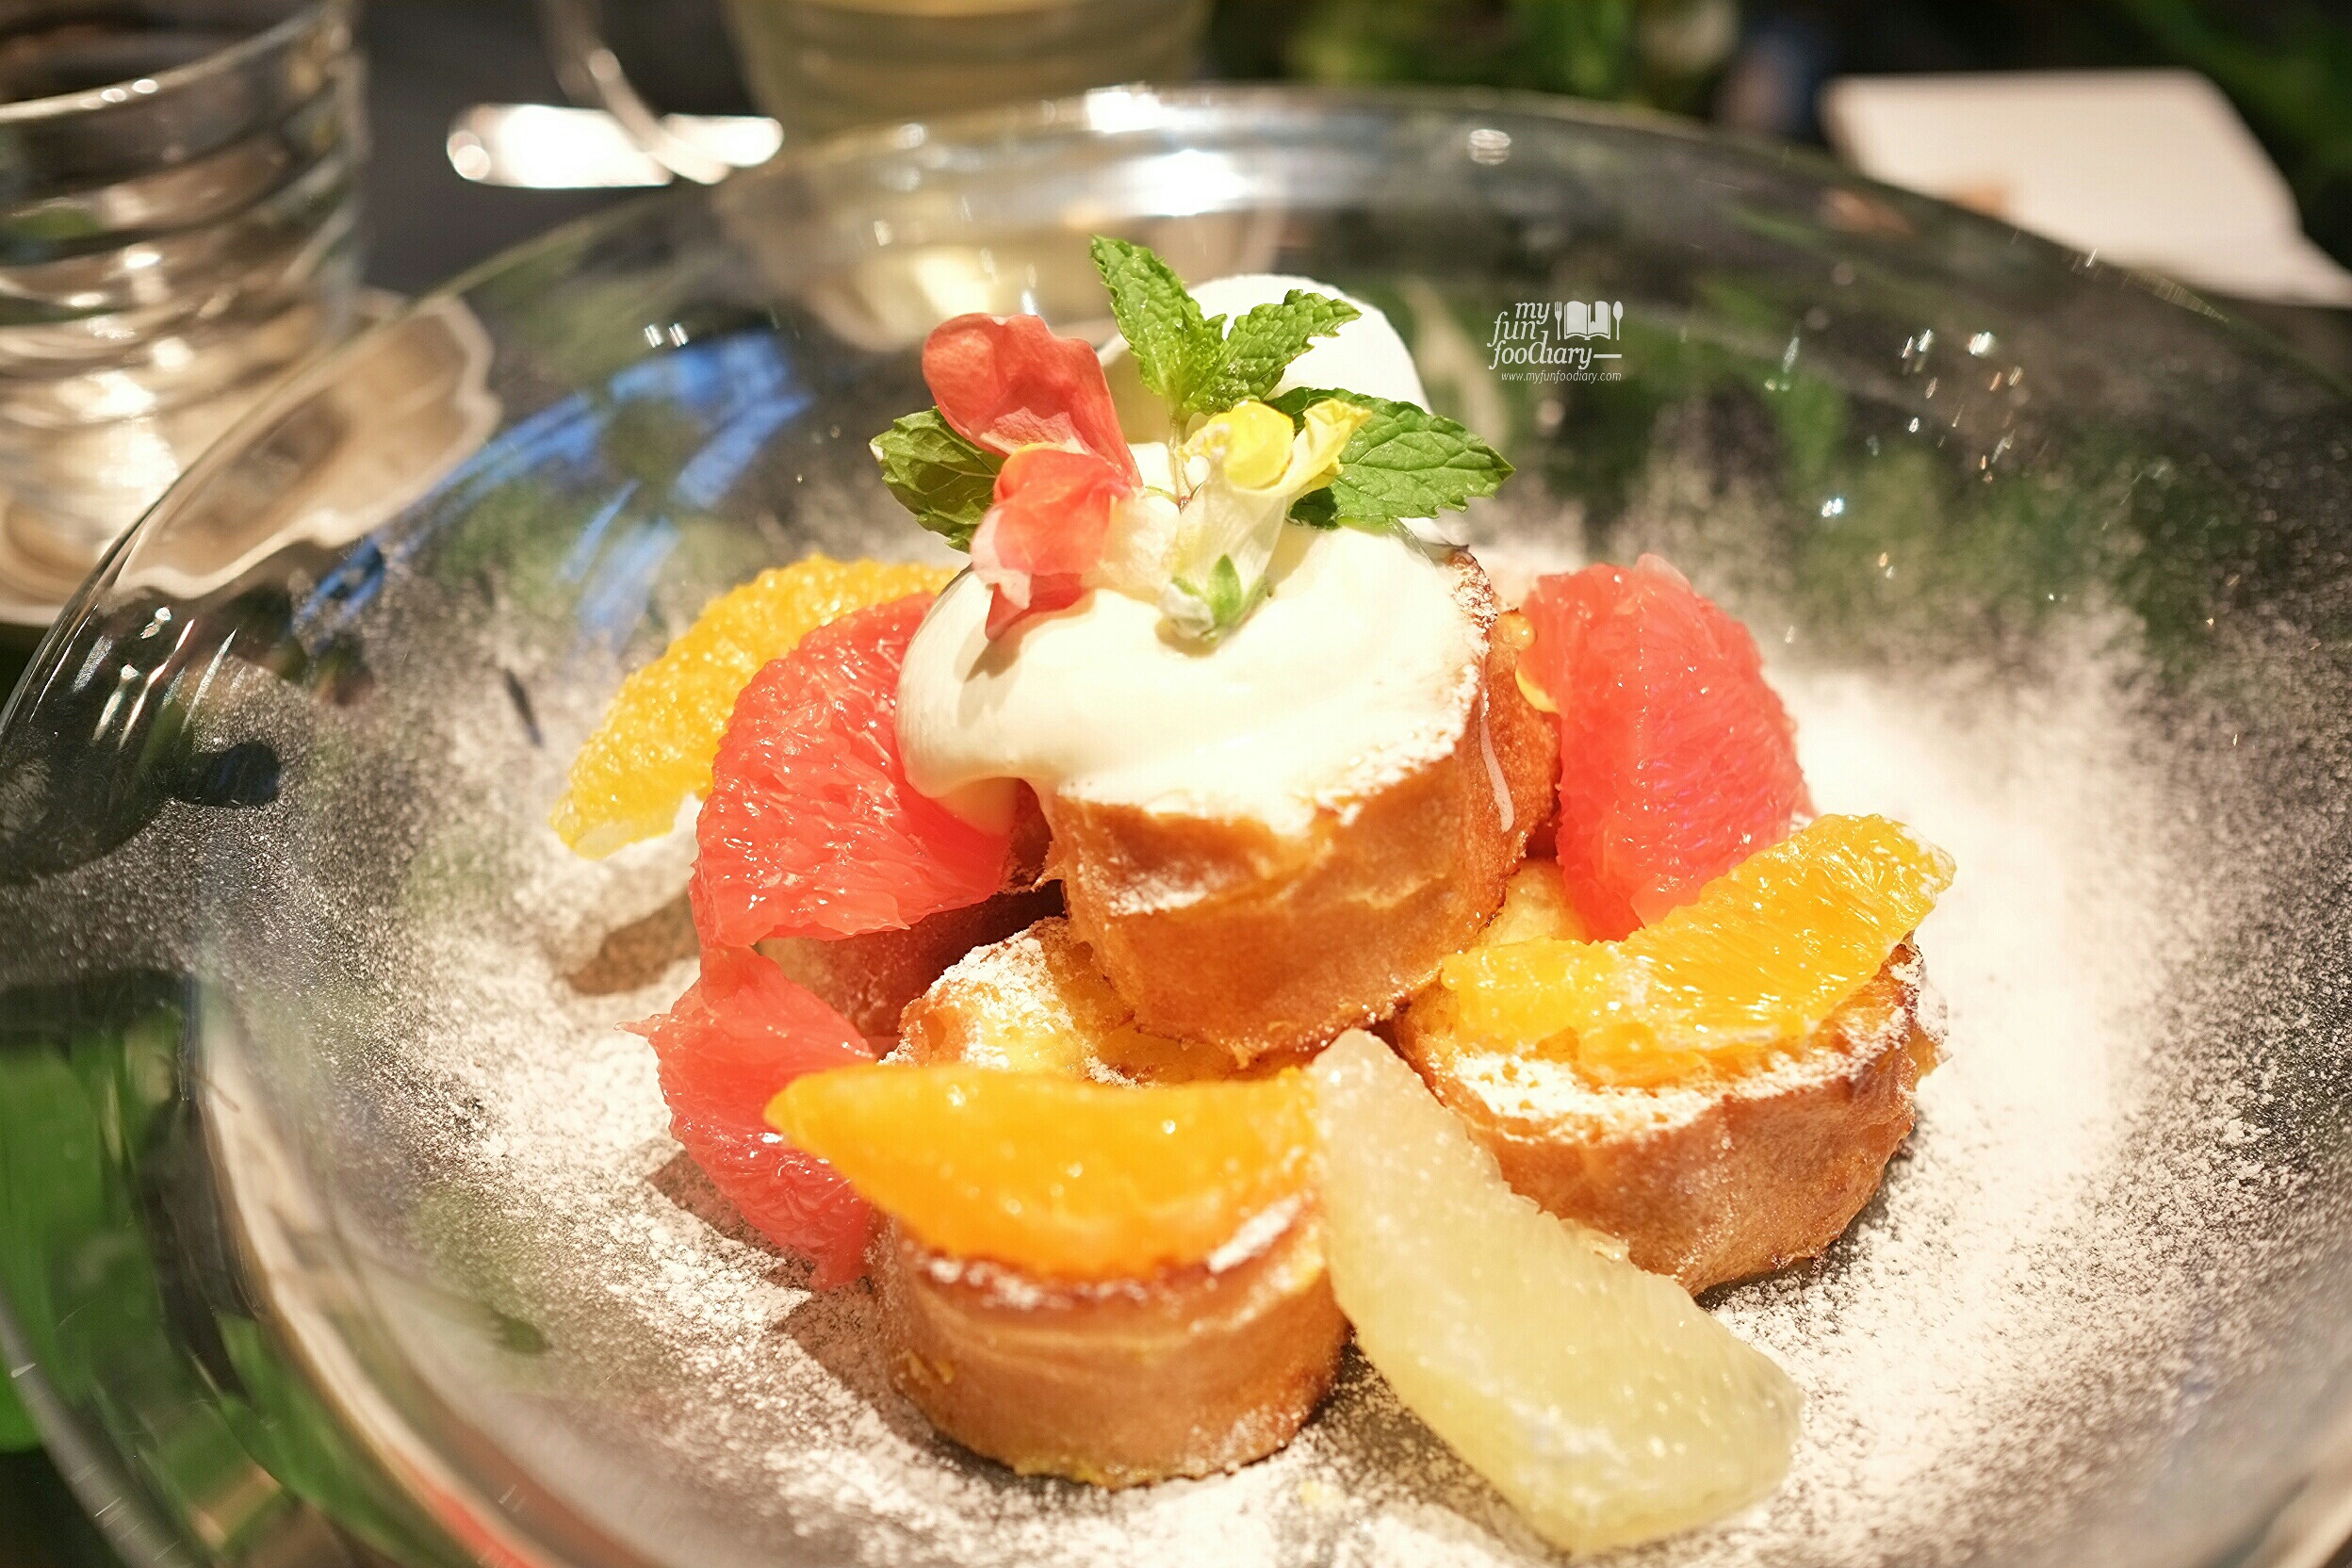 Flower French Toast at Aoyama Flower Market in Tokyo by Myfunfoodiary